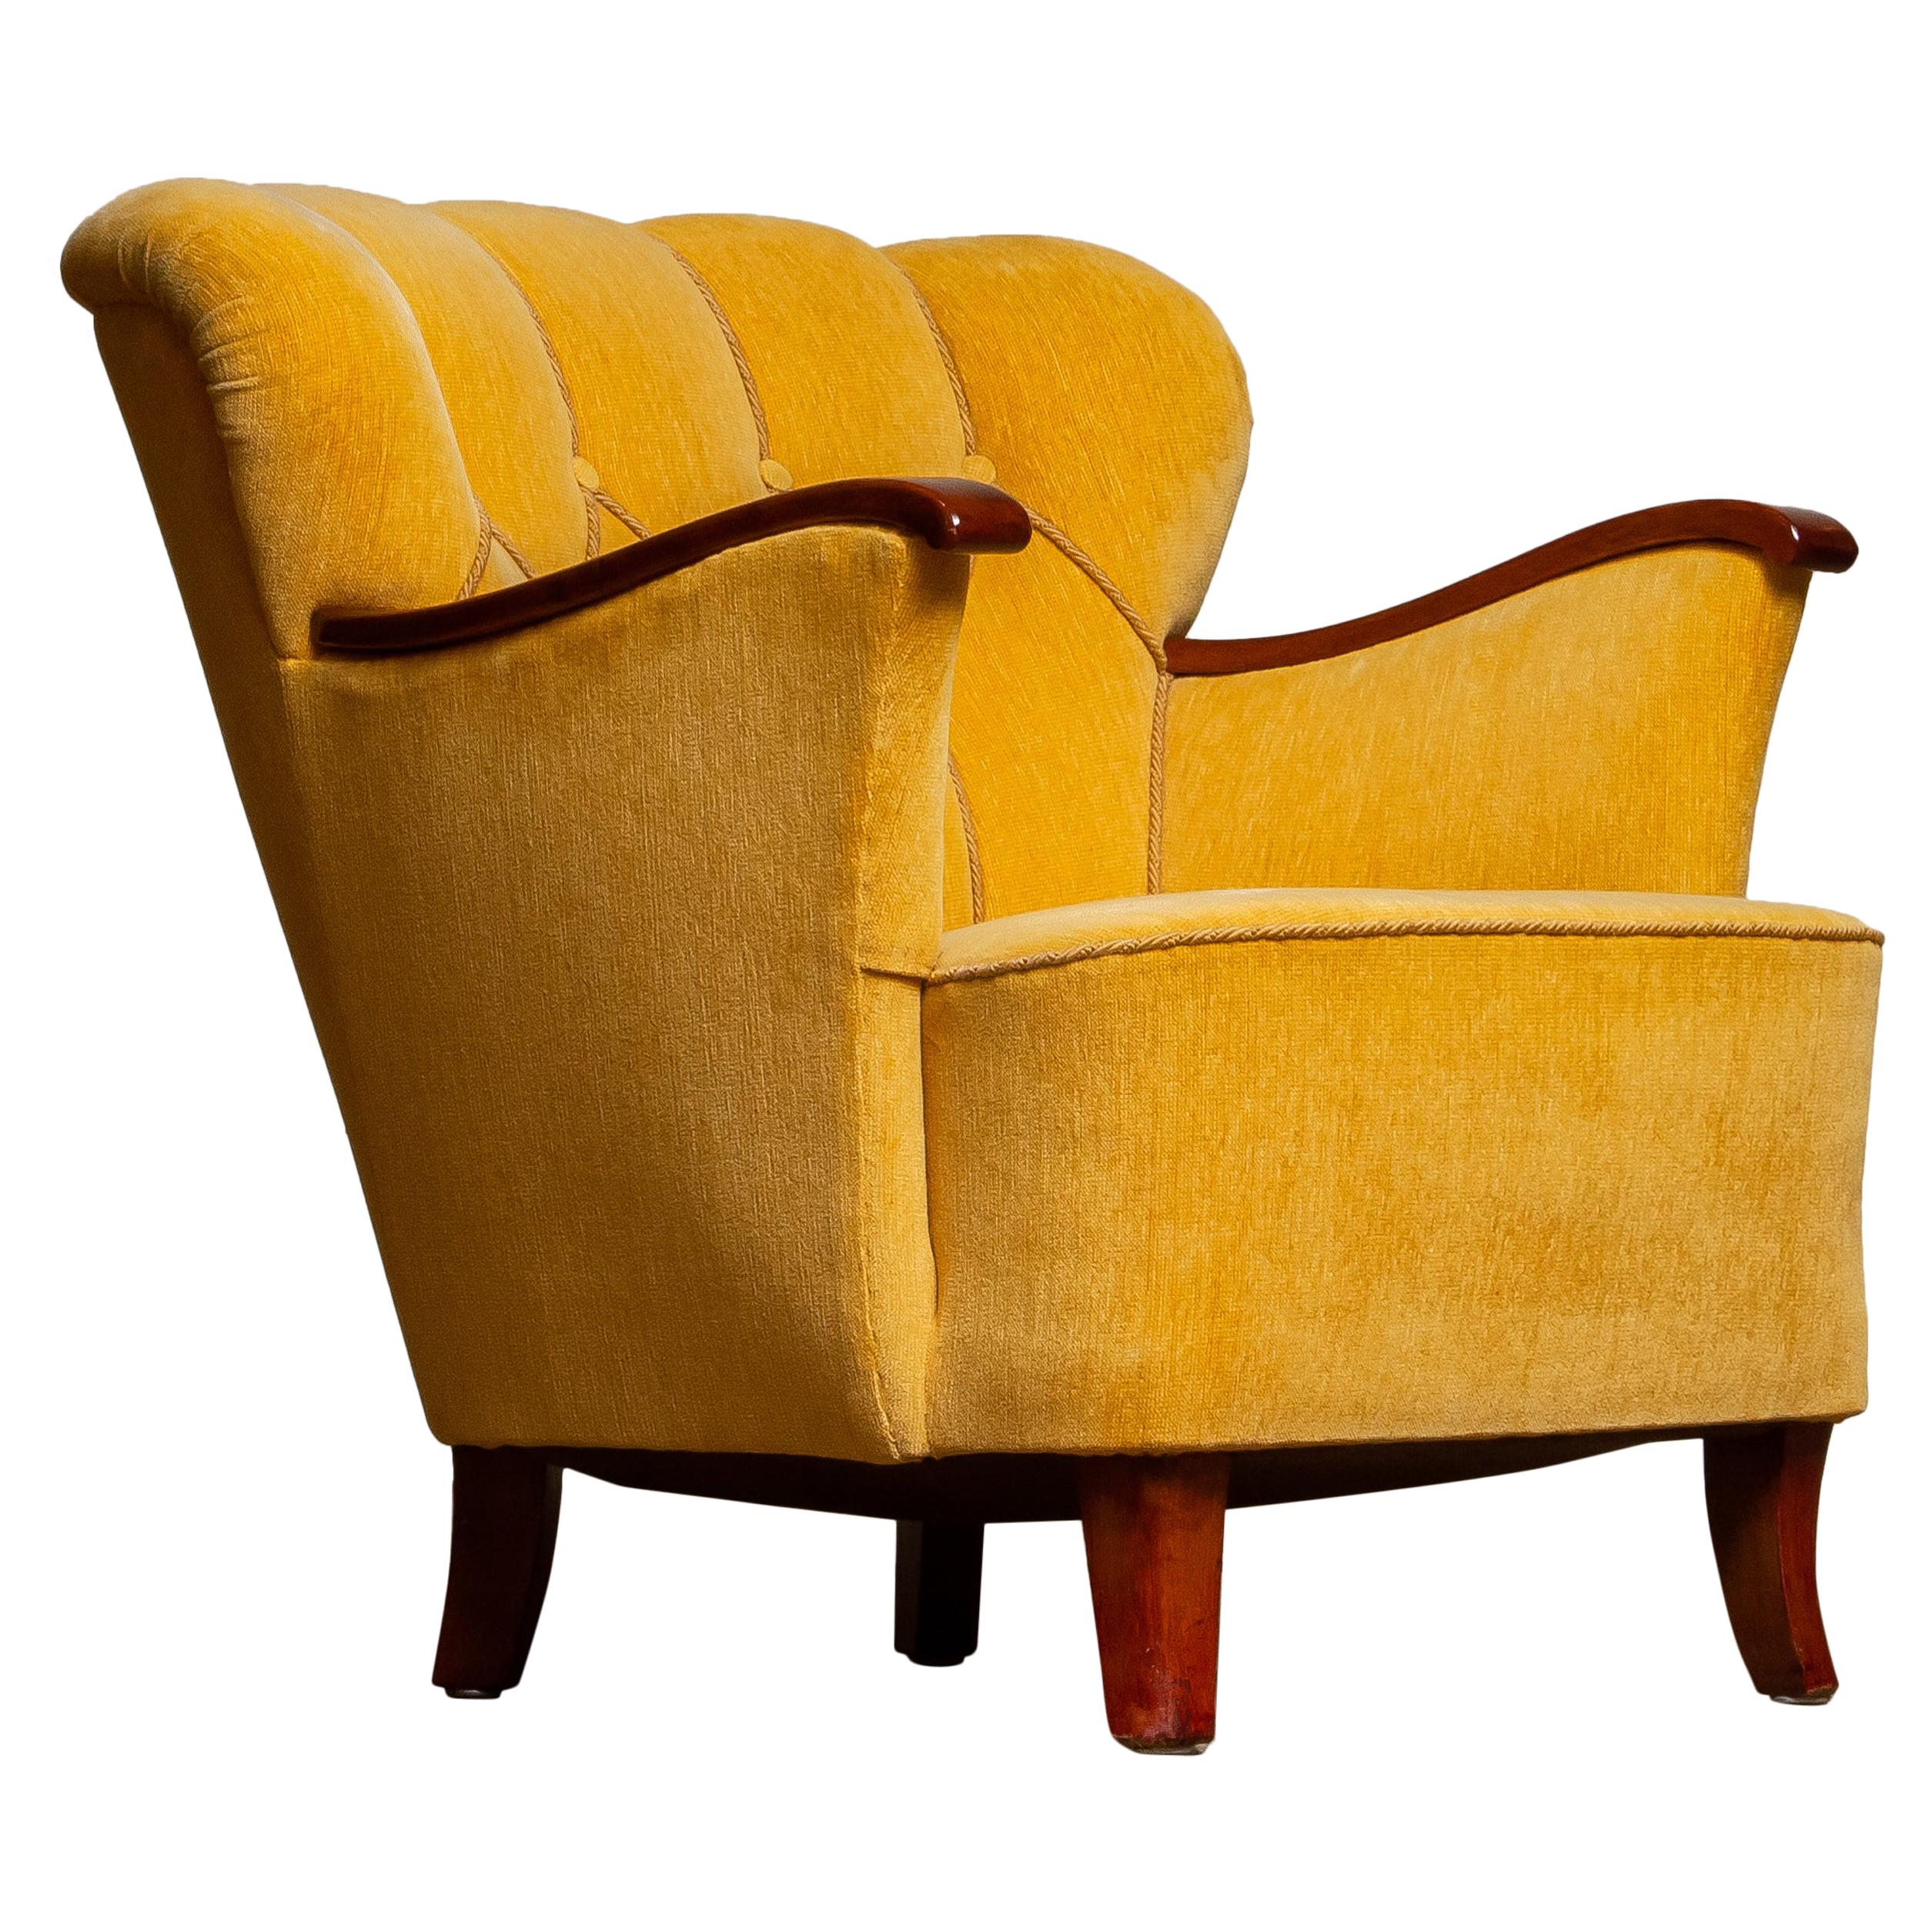 Very elegant and comfortable lounge / easy / club chair upholstered with yellow velvet and mahogany armrests.
The chair is overall in a good condition and supports perfect. Springs in the seat as well as the velvet upholstery are from a later